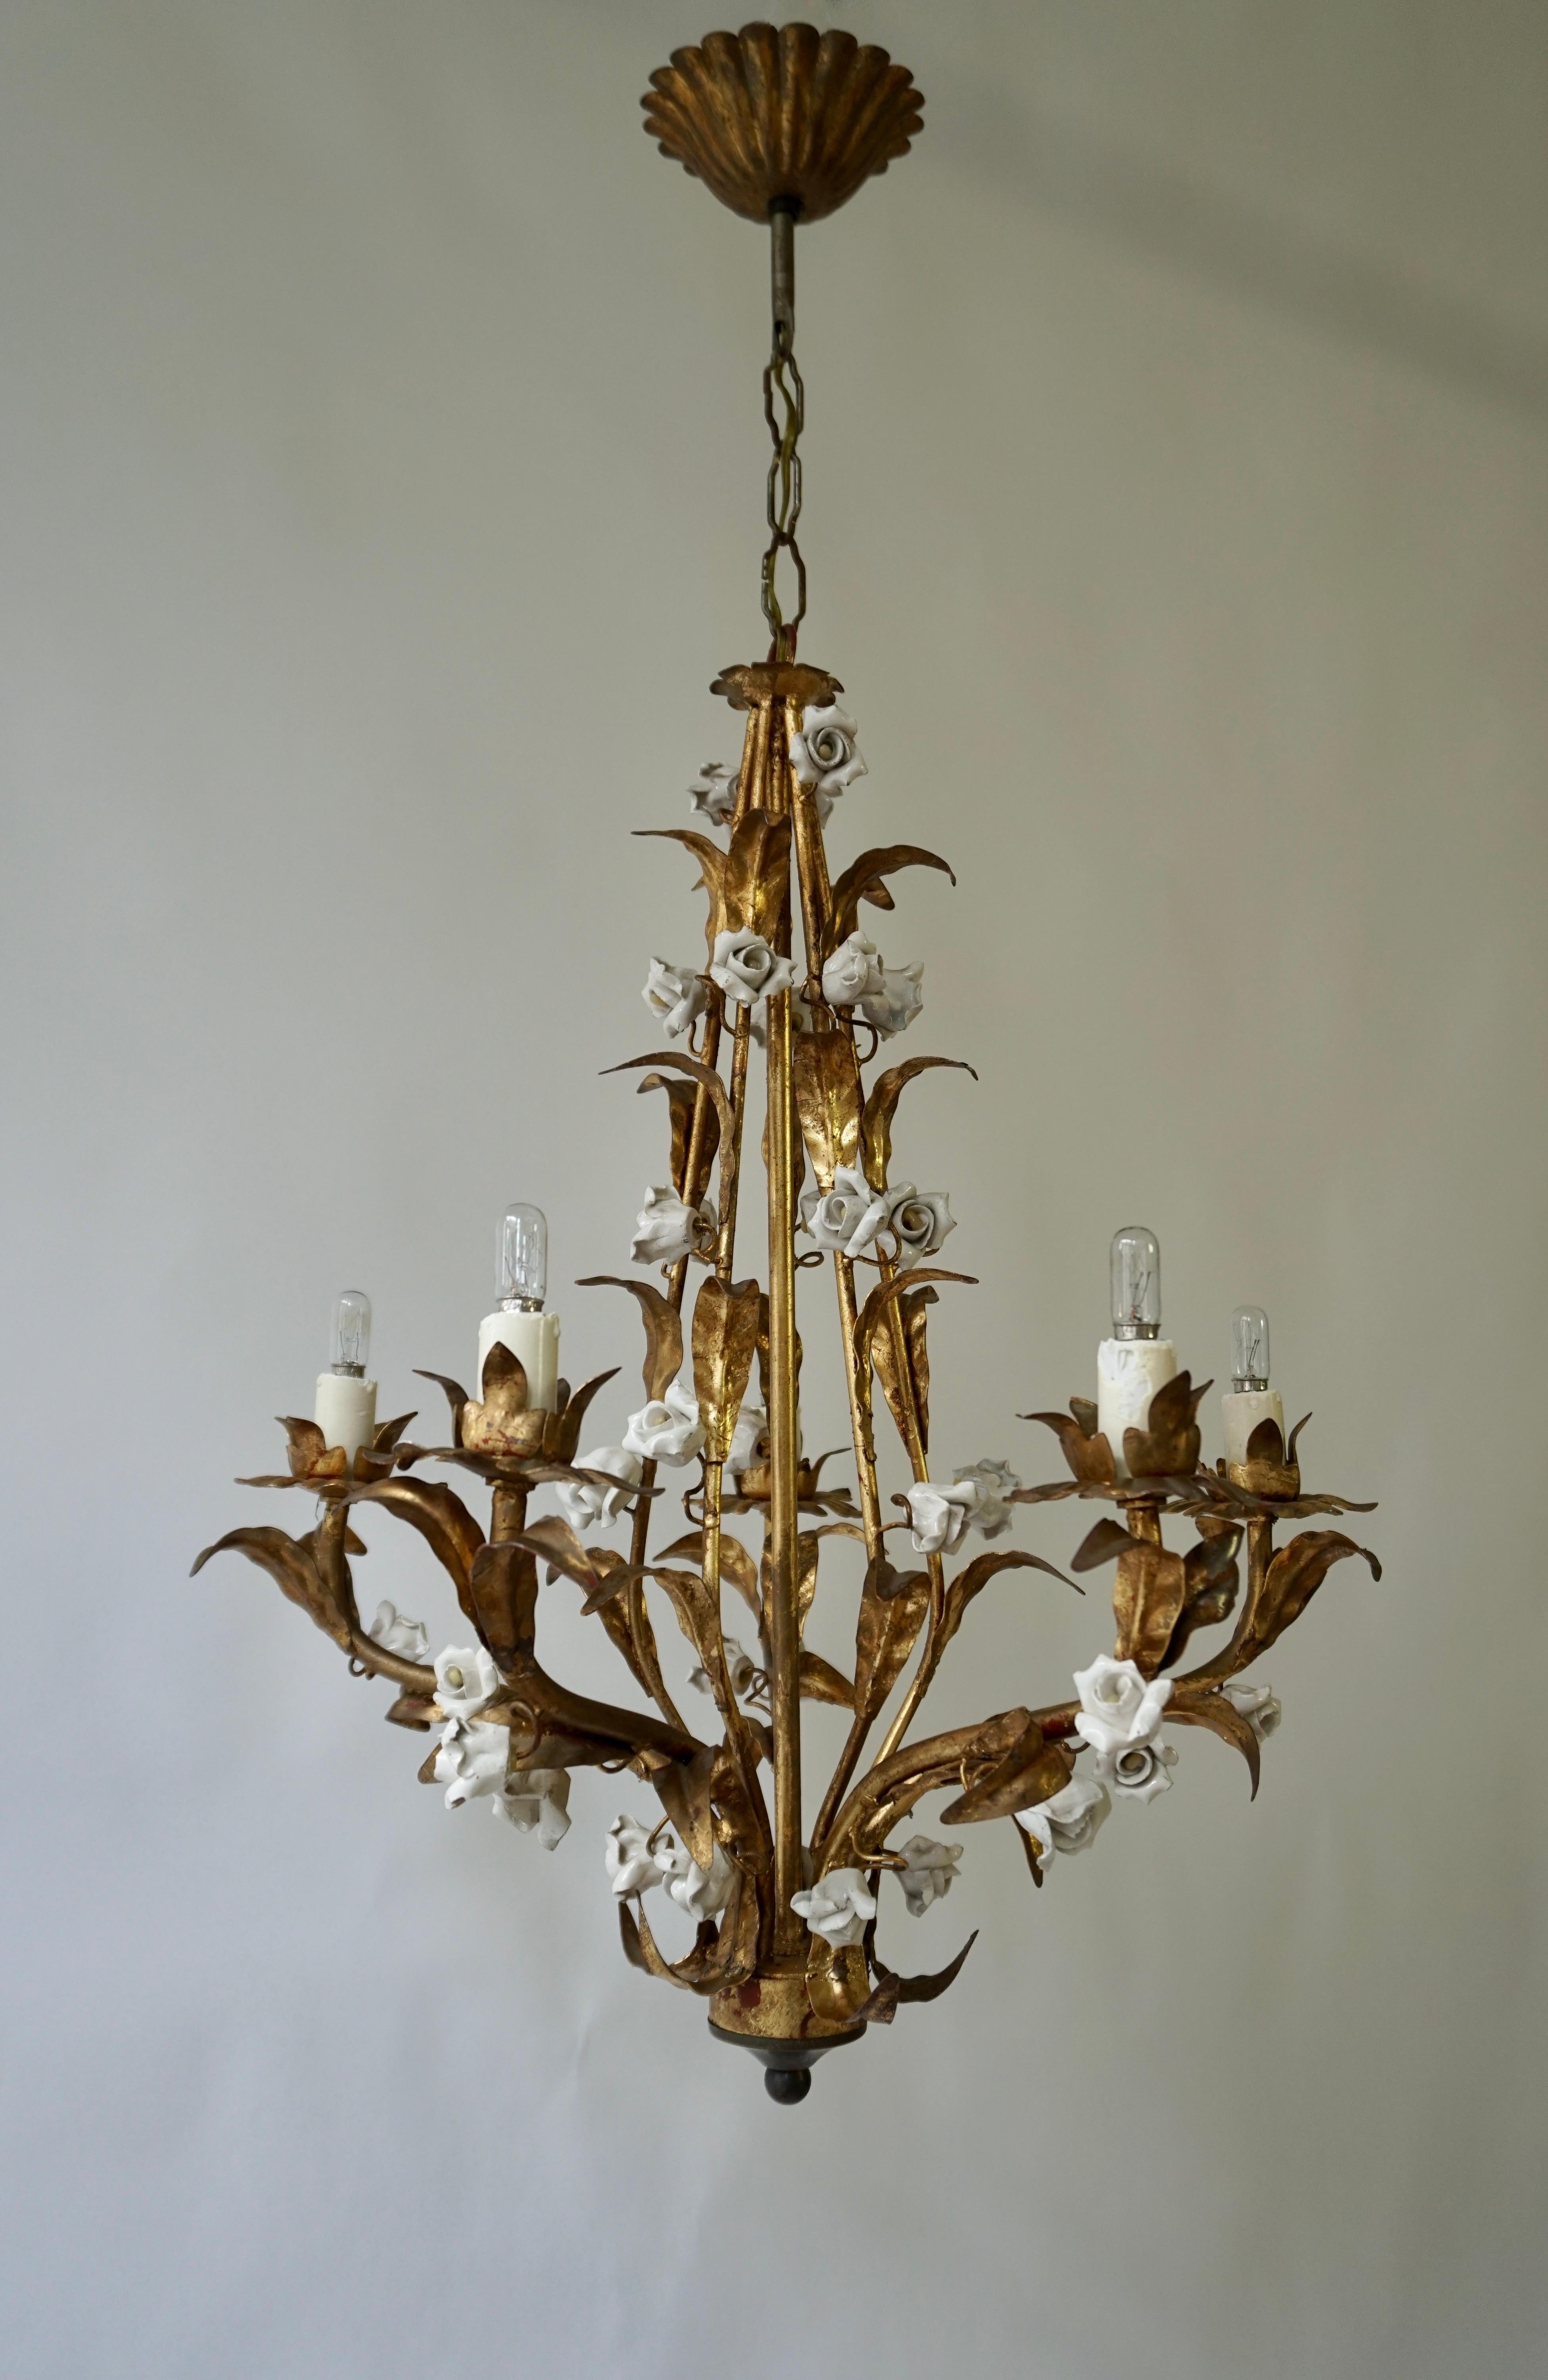 Two vintage, charming Italian hanging chandeliers, in brass with white ceramic handmade flower décor.
We also have the same model with pink flowers.

An exquisite patinated bronzed antique gold gilt Tole chandelier with 35 intricately hand crafted